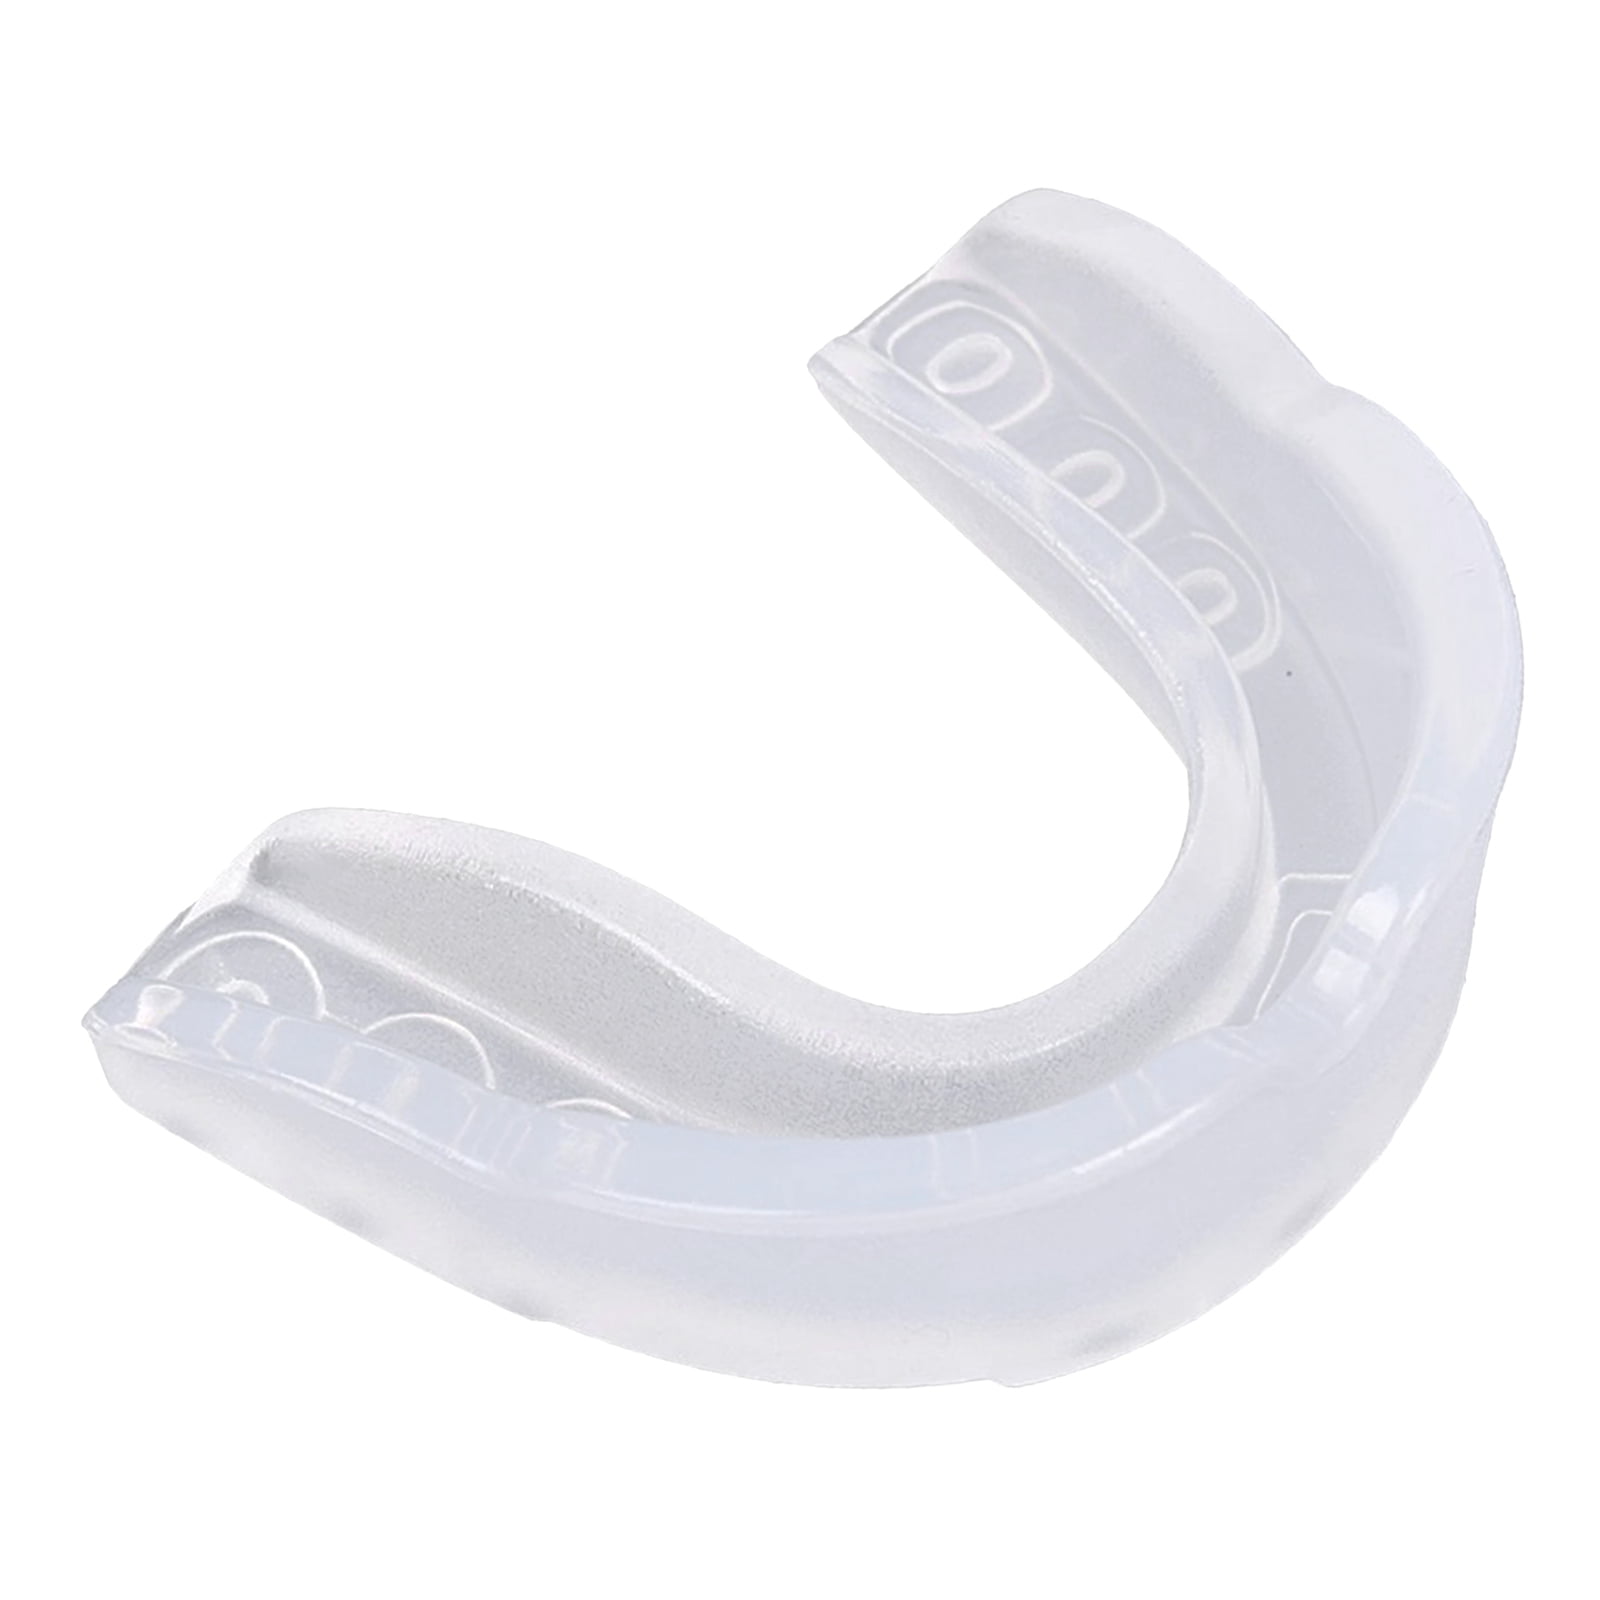 Opro Power-Fit Mma Hockey Rugby Boxing Polo Mouthguard Gum Shield Protector 